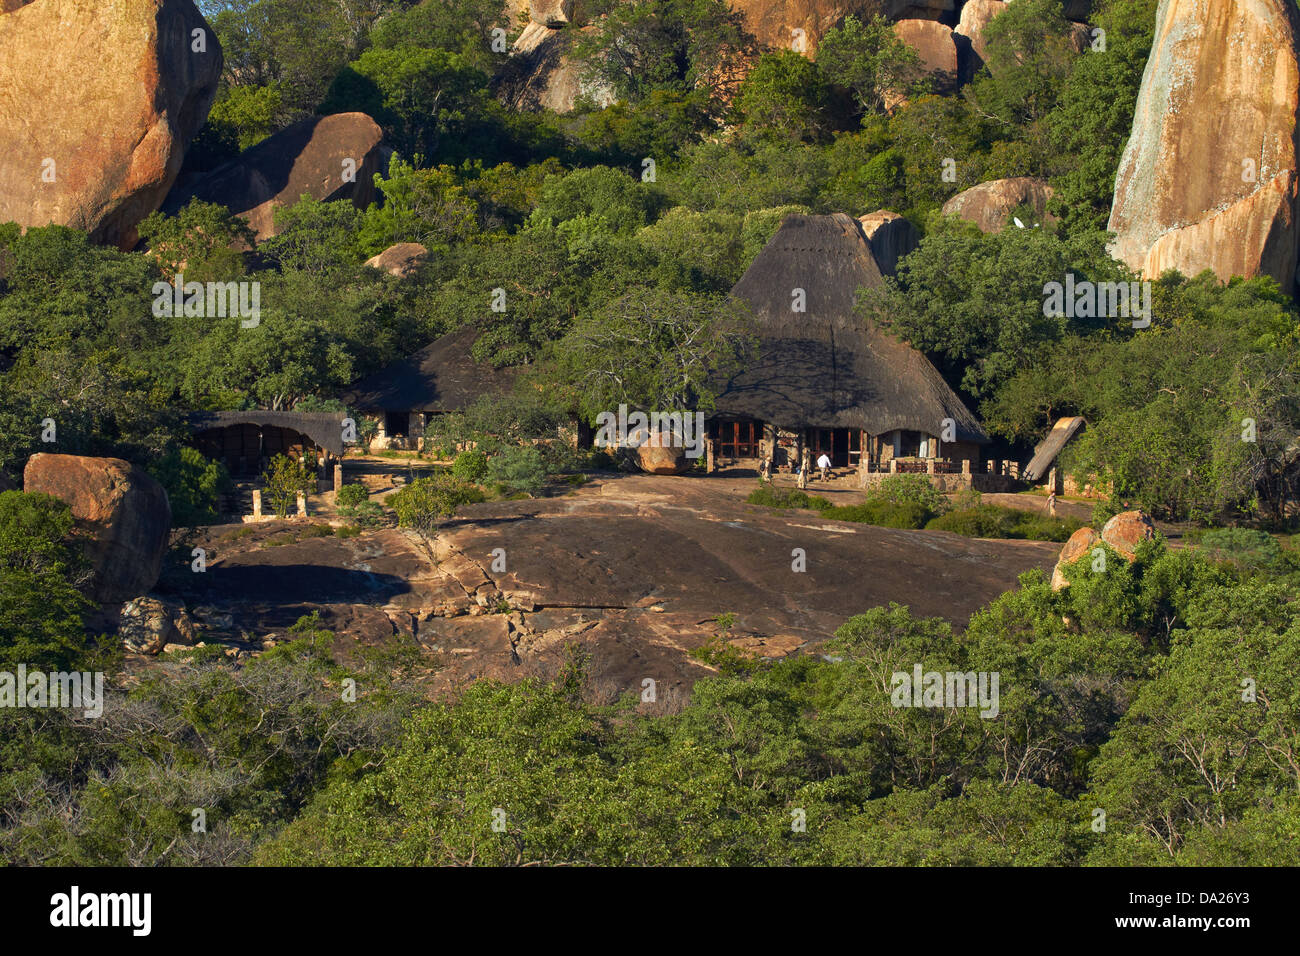 Big Cave Camp, blending in to the granite outcrops of the Matopos Hills, near Bulawayo, Zimbabwe, Southern Africa Stock Photo